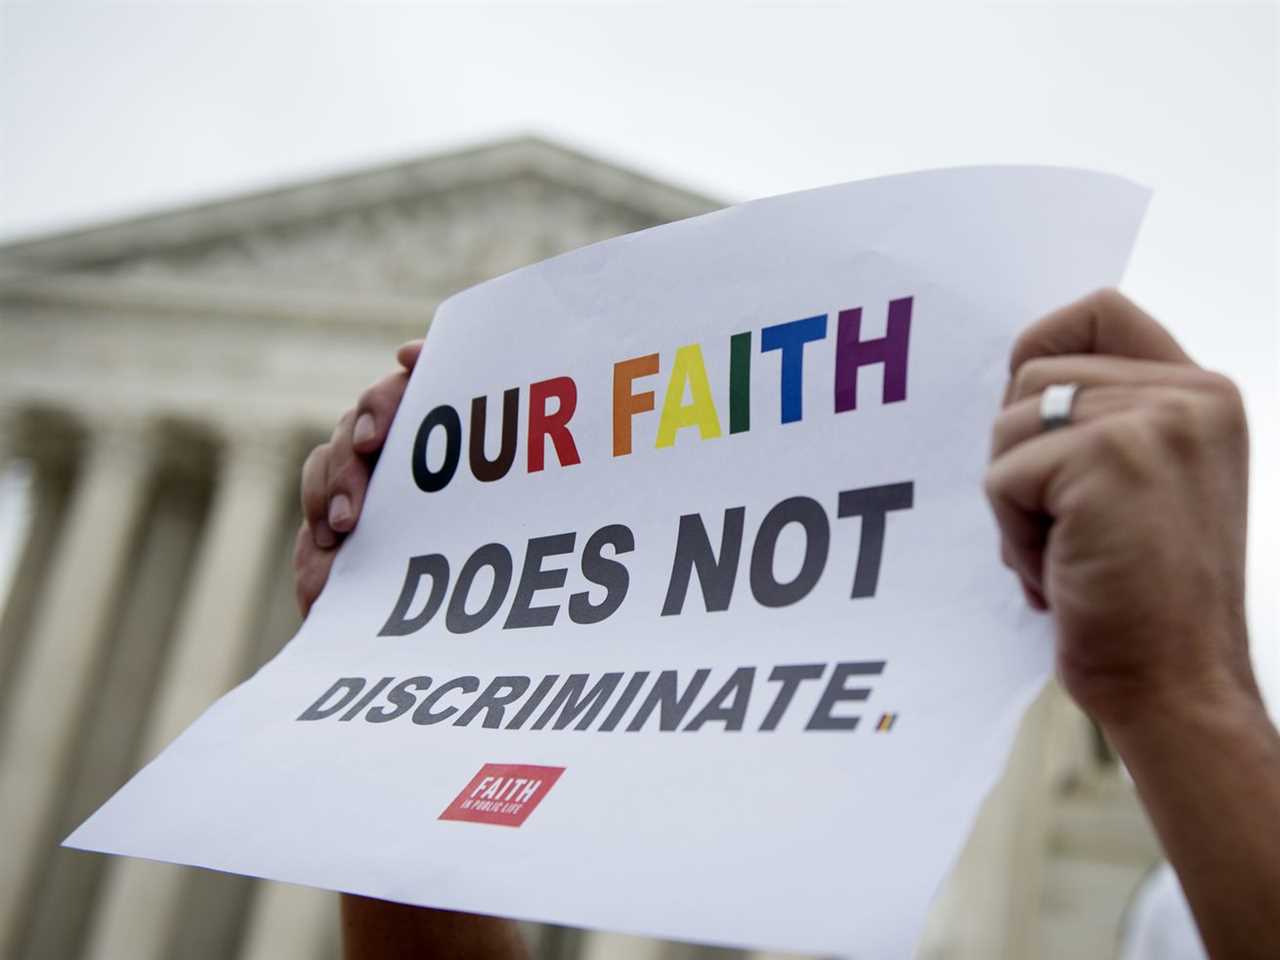 An arm holds up a sign saying “Our faith does not discriminate” in rainbow-colored letters, in front of the US Supreme Court building.